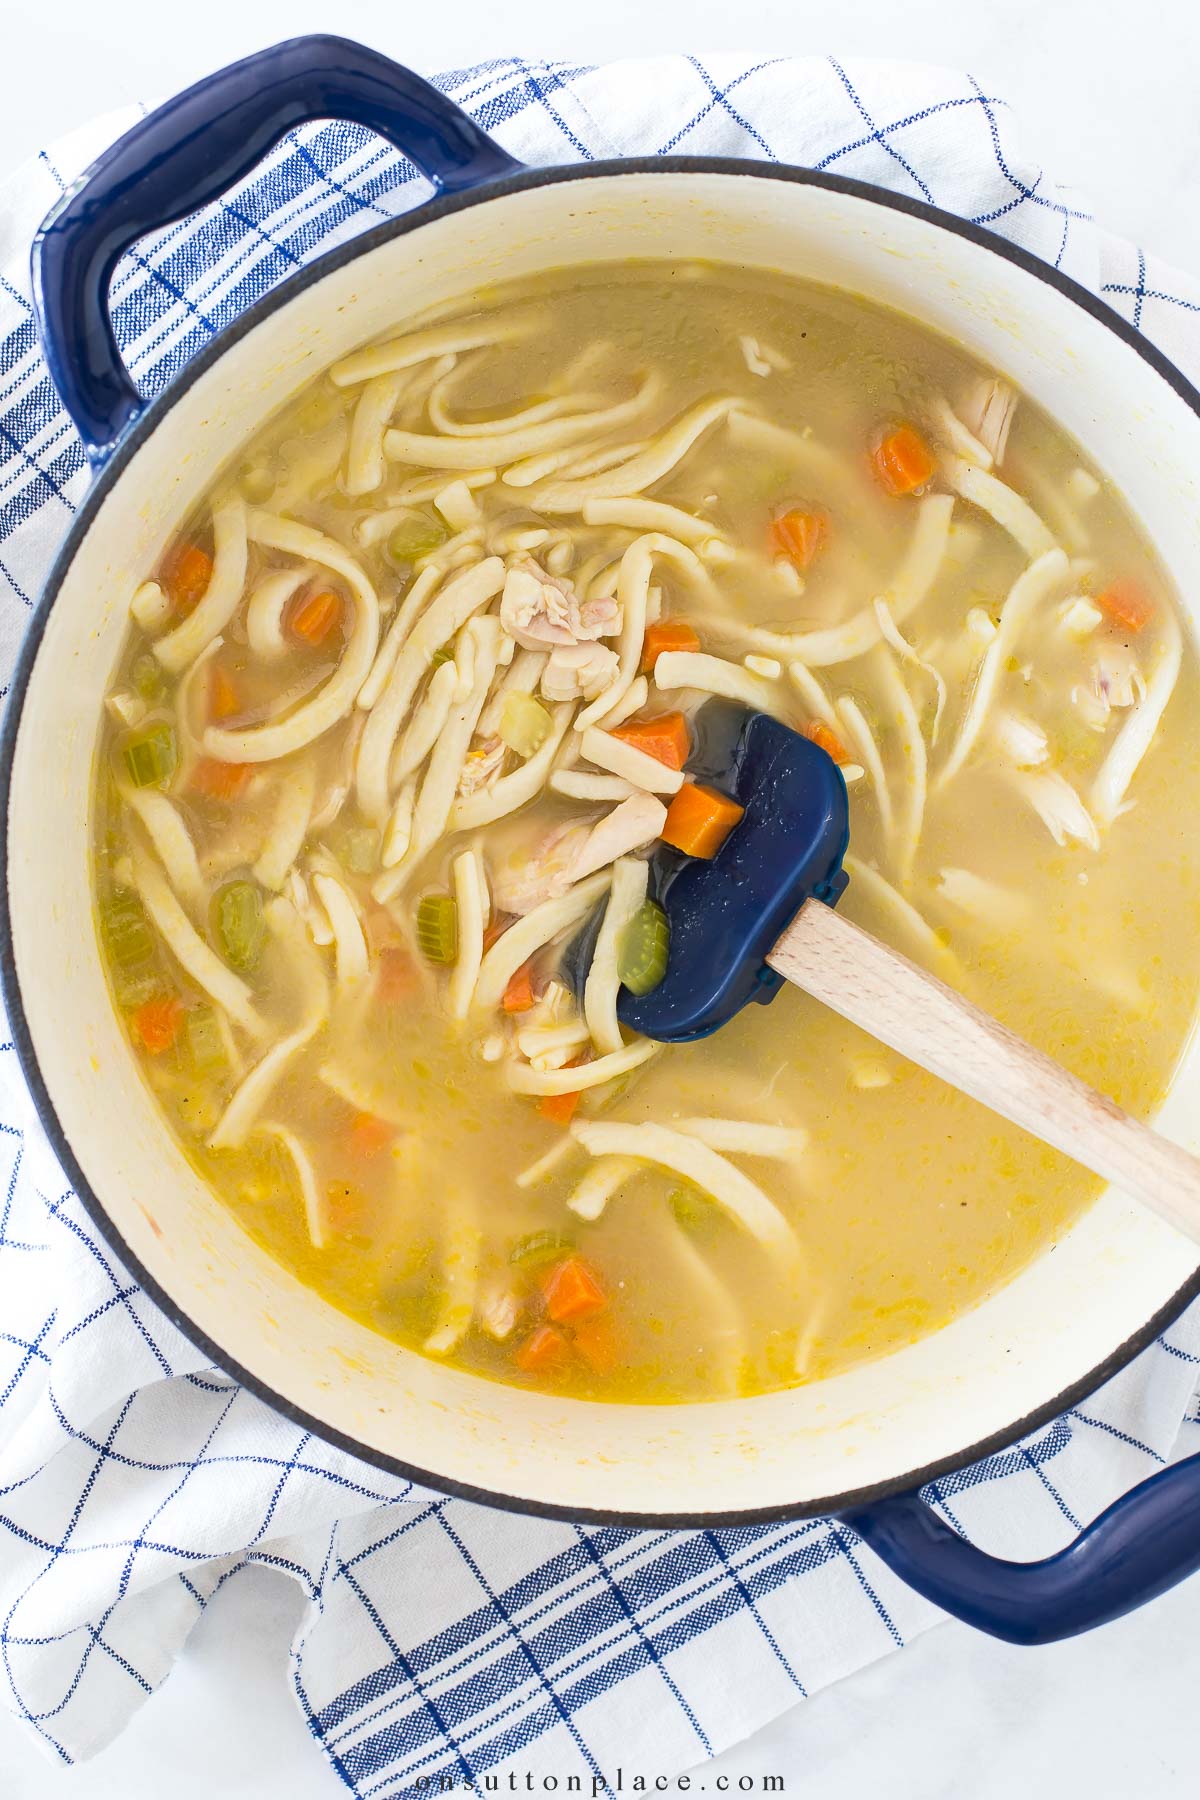 Simple Chicken Soup Recipe: How to Make It